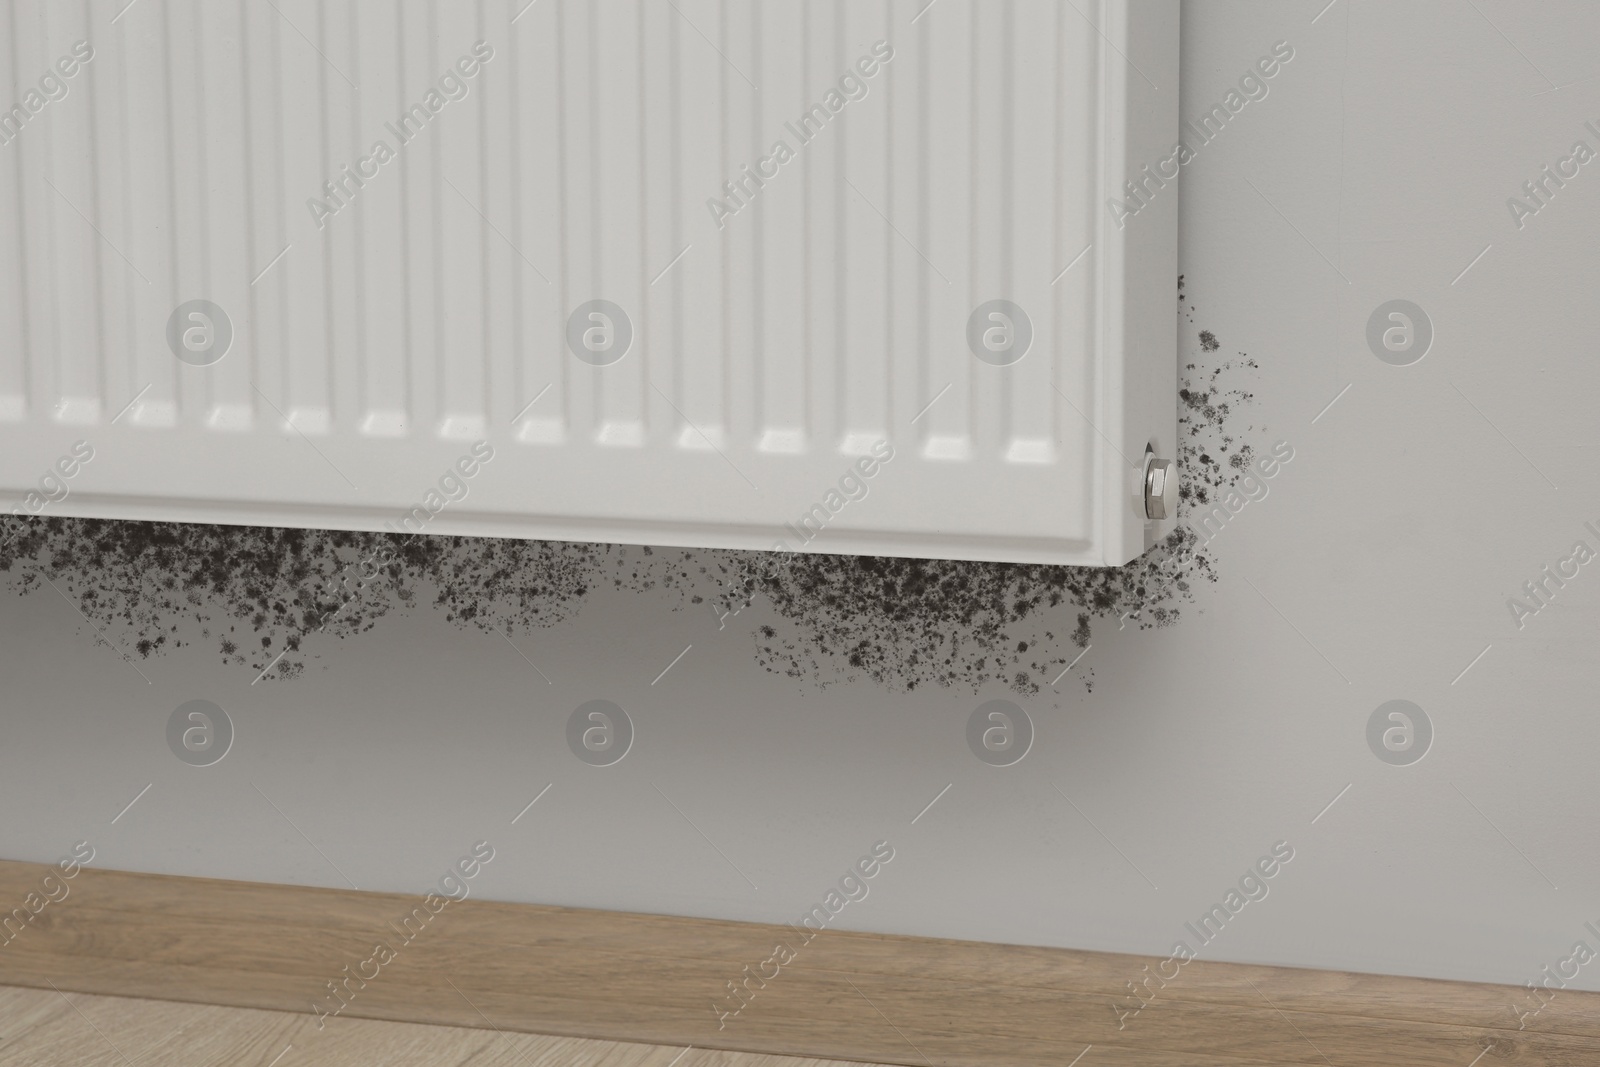 Image of Mold around panel radiator on wall in room